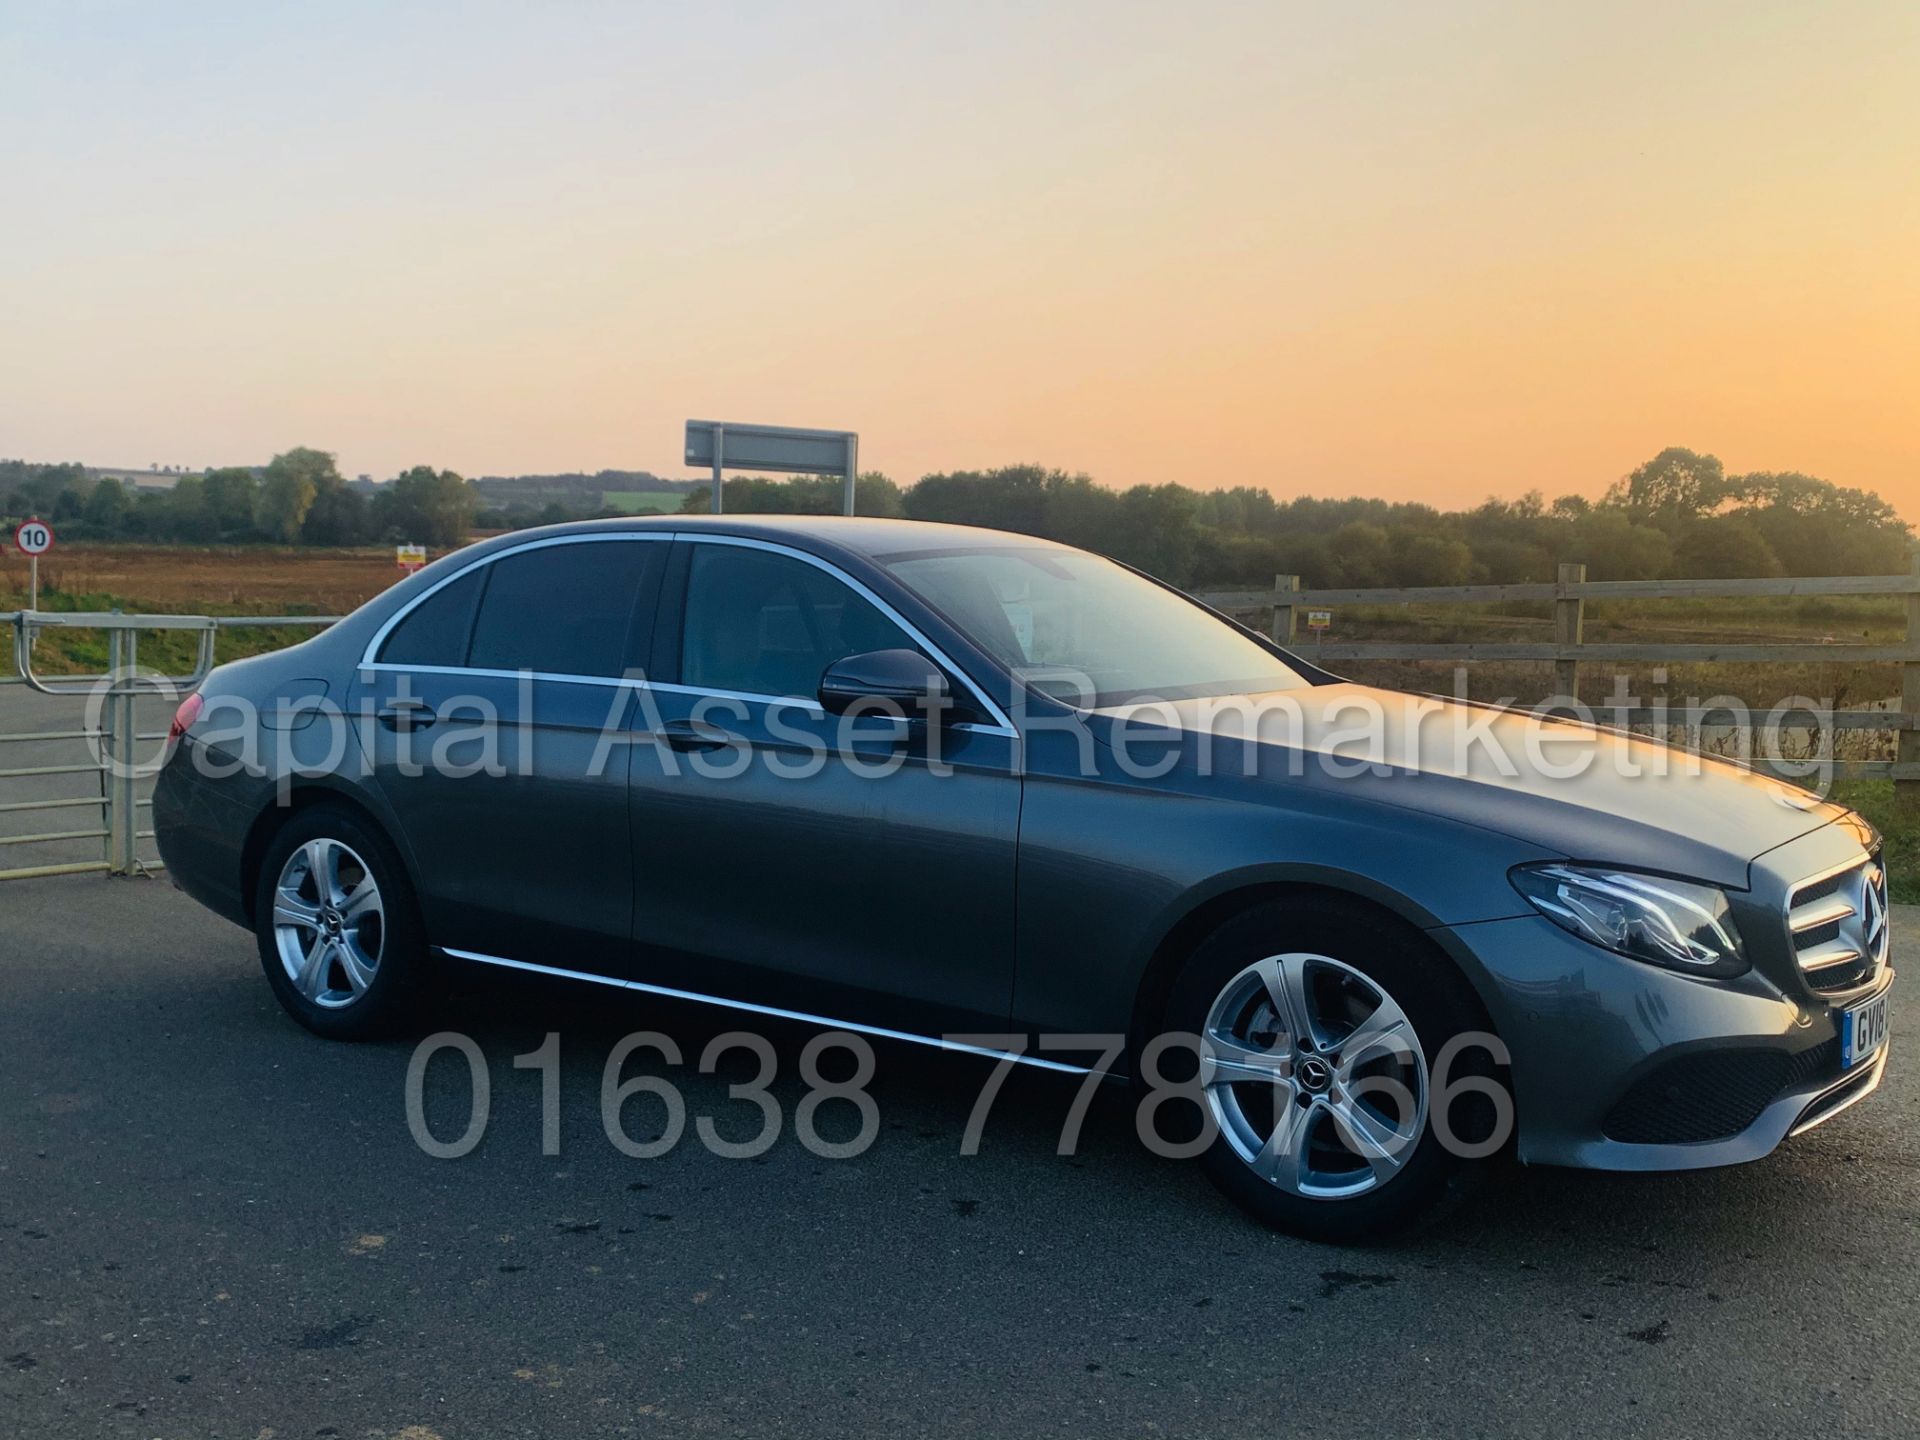 (On Sale) MERCEDES-BENZ E220D *SALOON* (2018 - NEW MODEL) '9-G TRONIC AUTO - LEATHER - SAT NAV' - Image 11 of 53